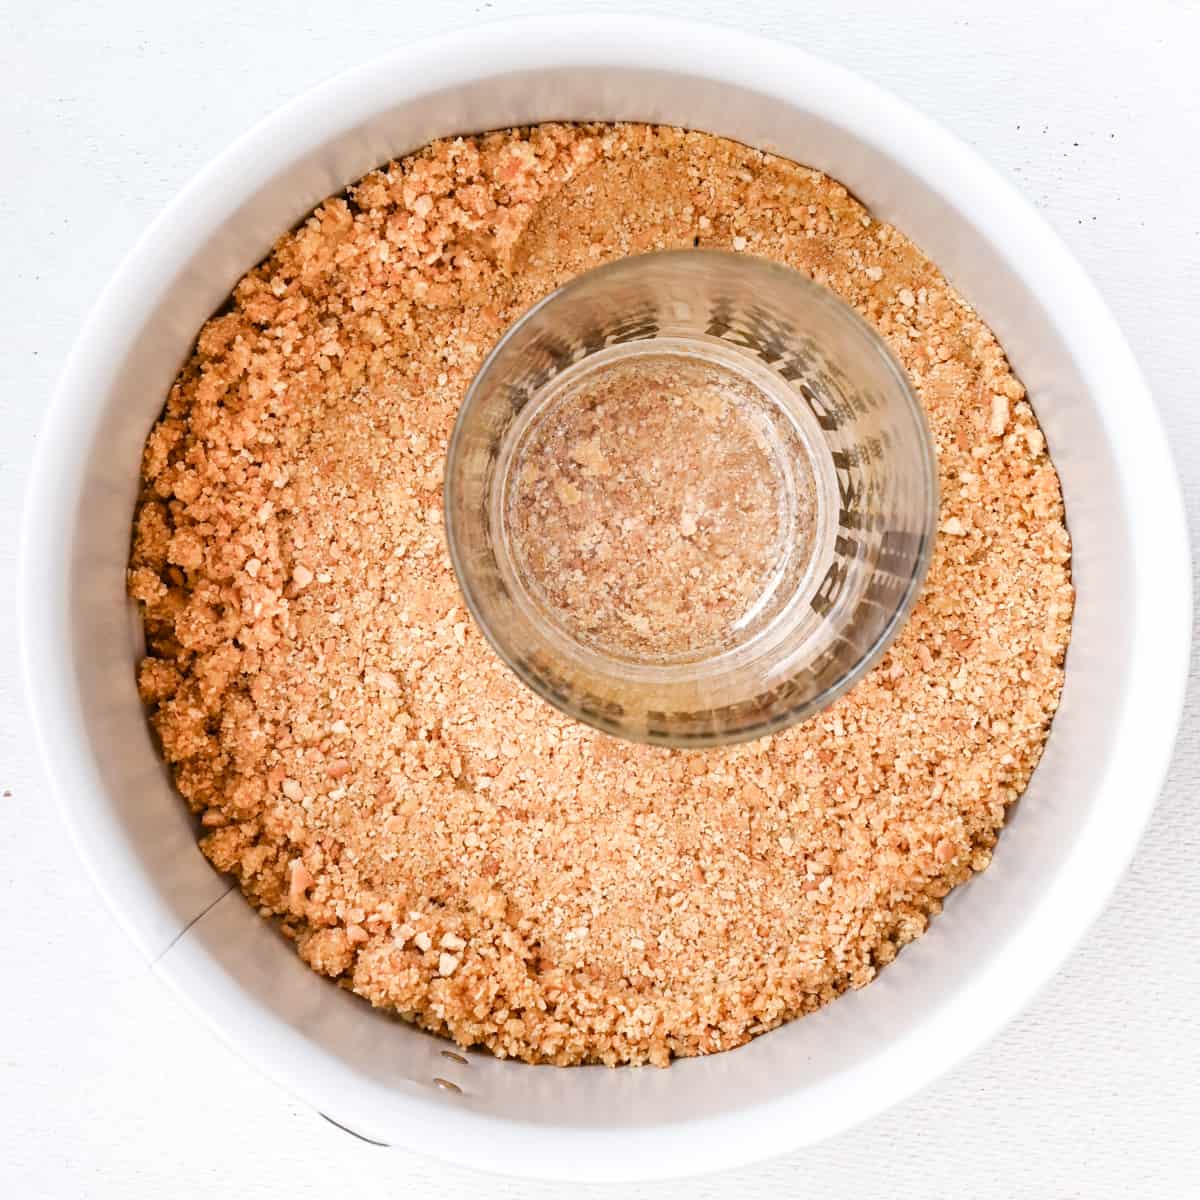 The crumbly tart base is pressed into a cake tin using the flat bottom of a drinking glass.